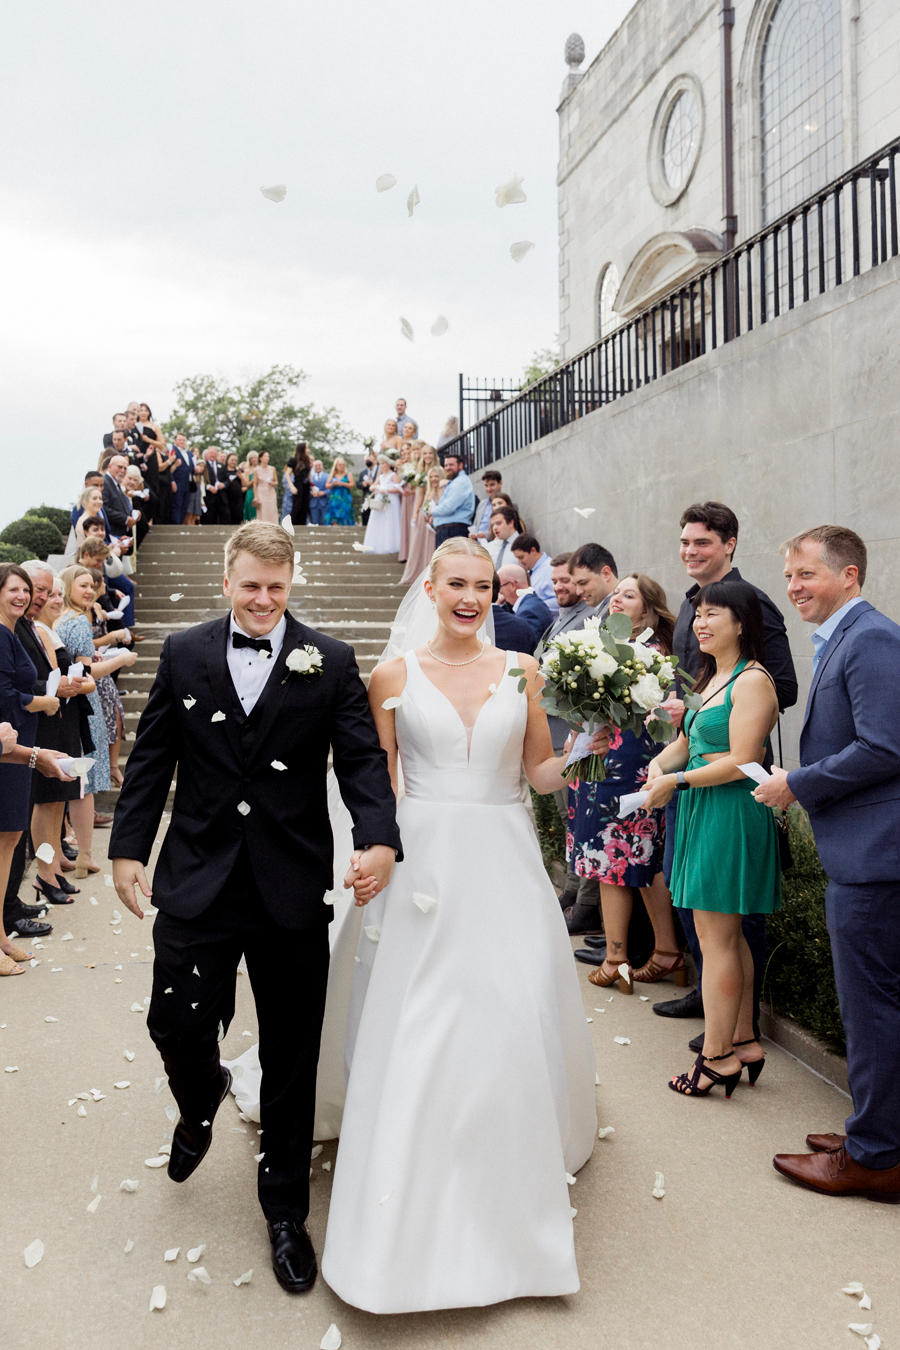 Guest throw petals as the bride and groom exit the Church of St. Mary, Aldermanbury at a Westminster College wedding by Love Tree Studios.